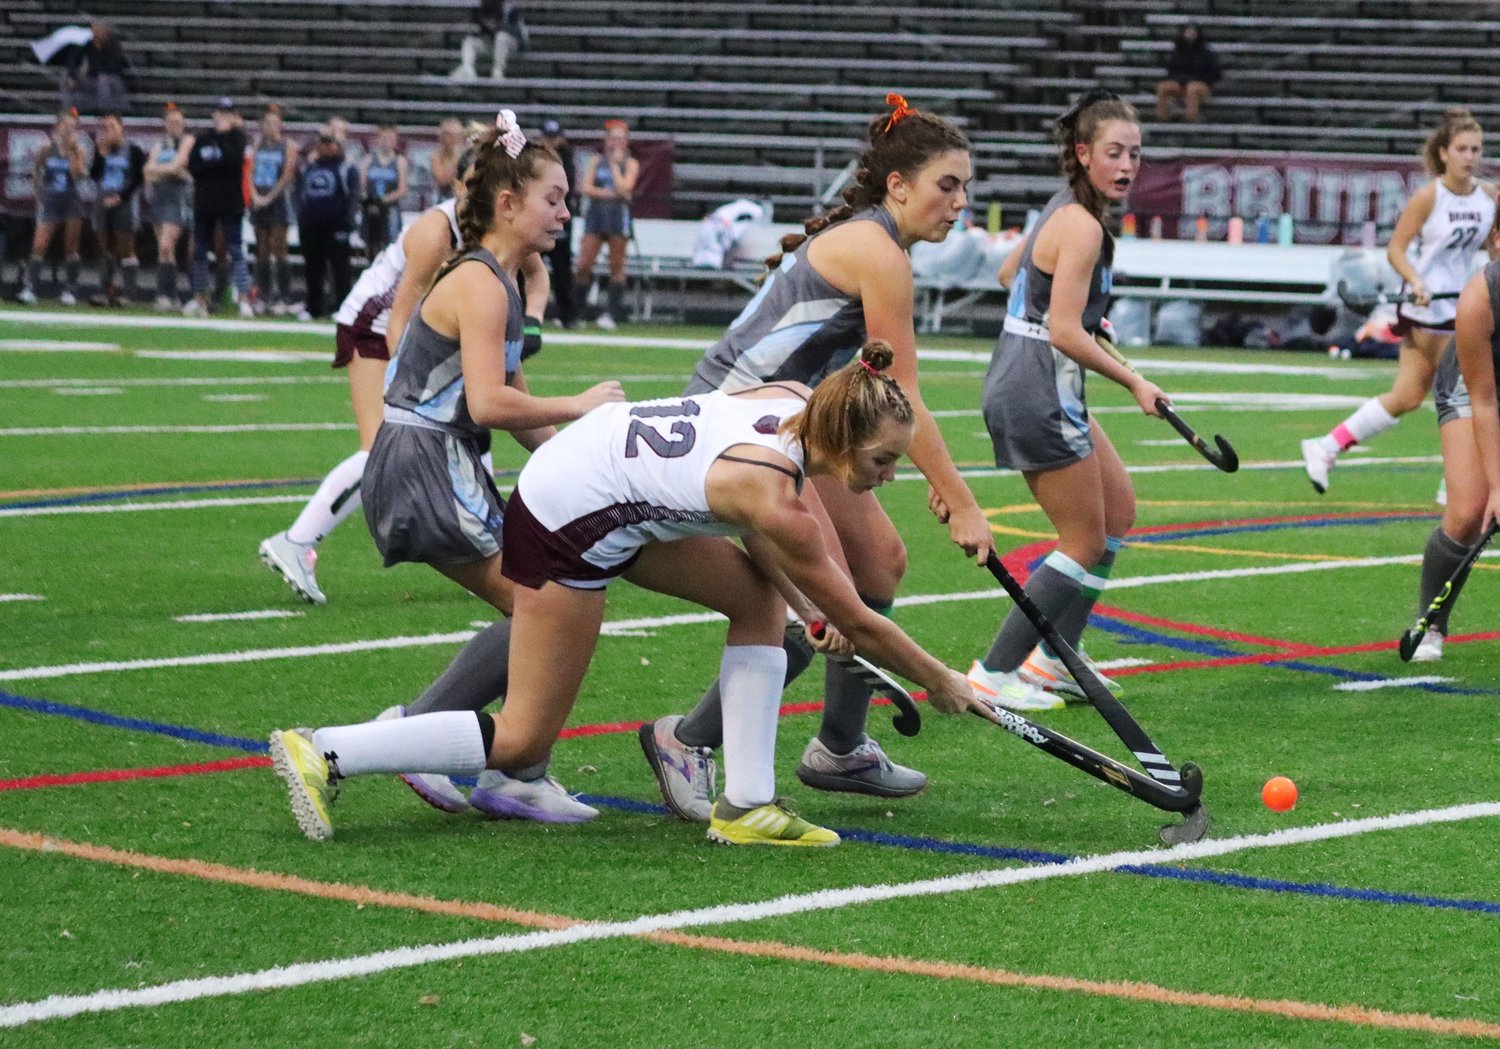 Chloe Page had two assists in the Broadneck win.